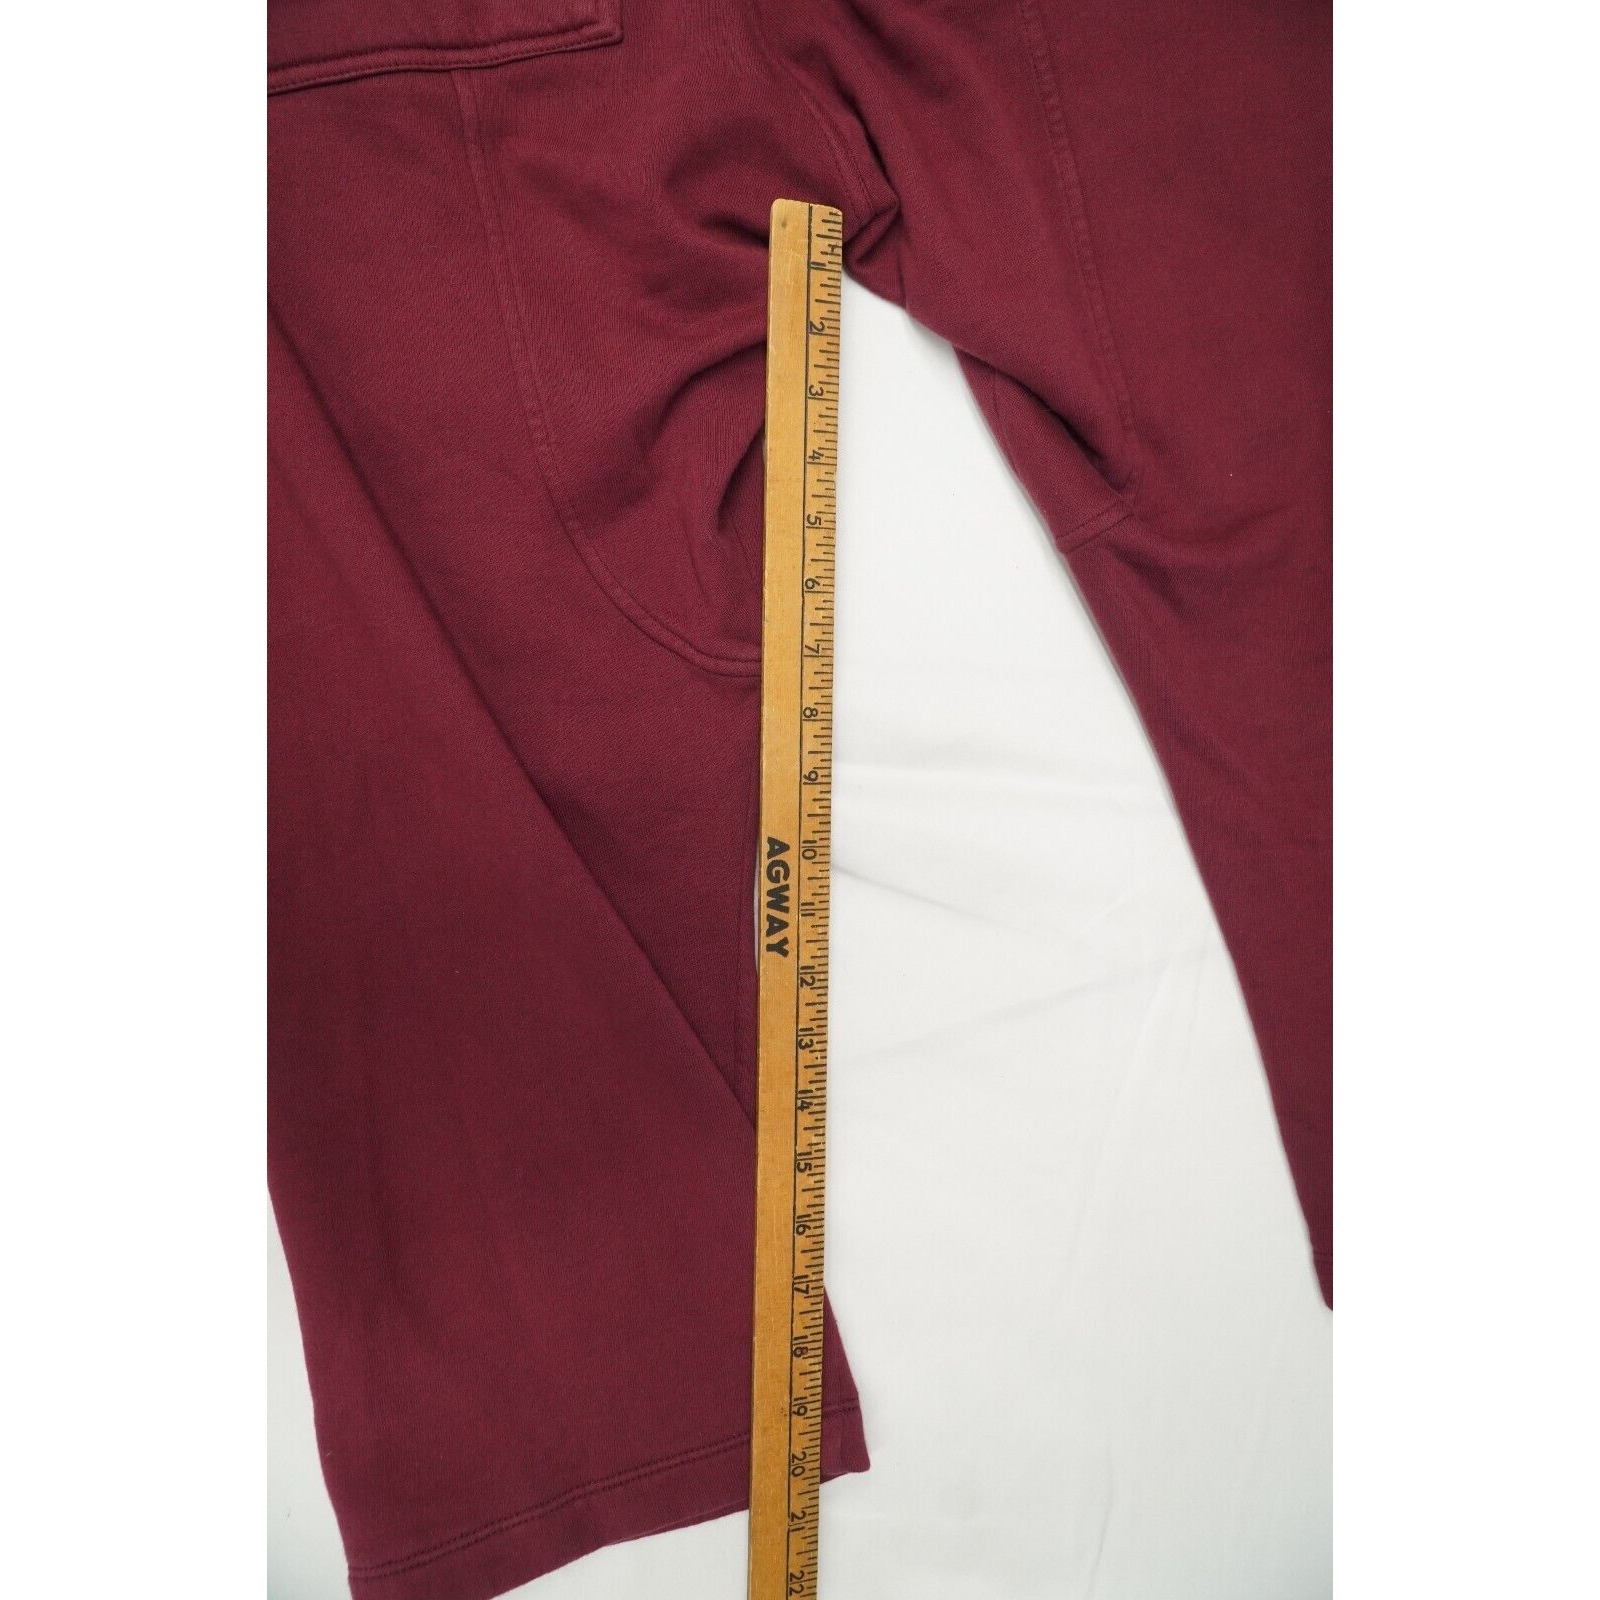 Rick Creatch Cargo Cropped Sweatpant Bruise Red FW20 - 17